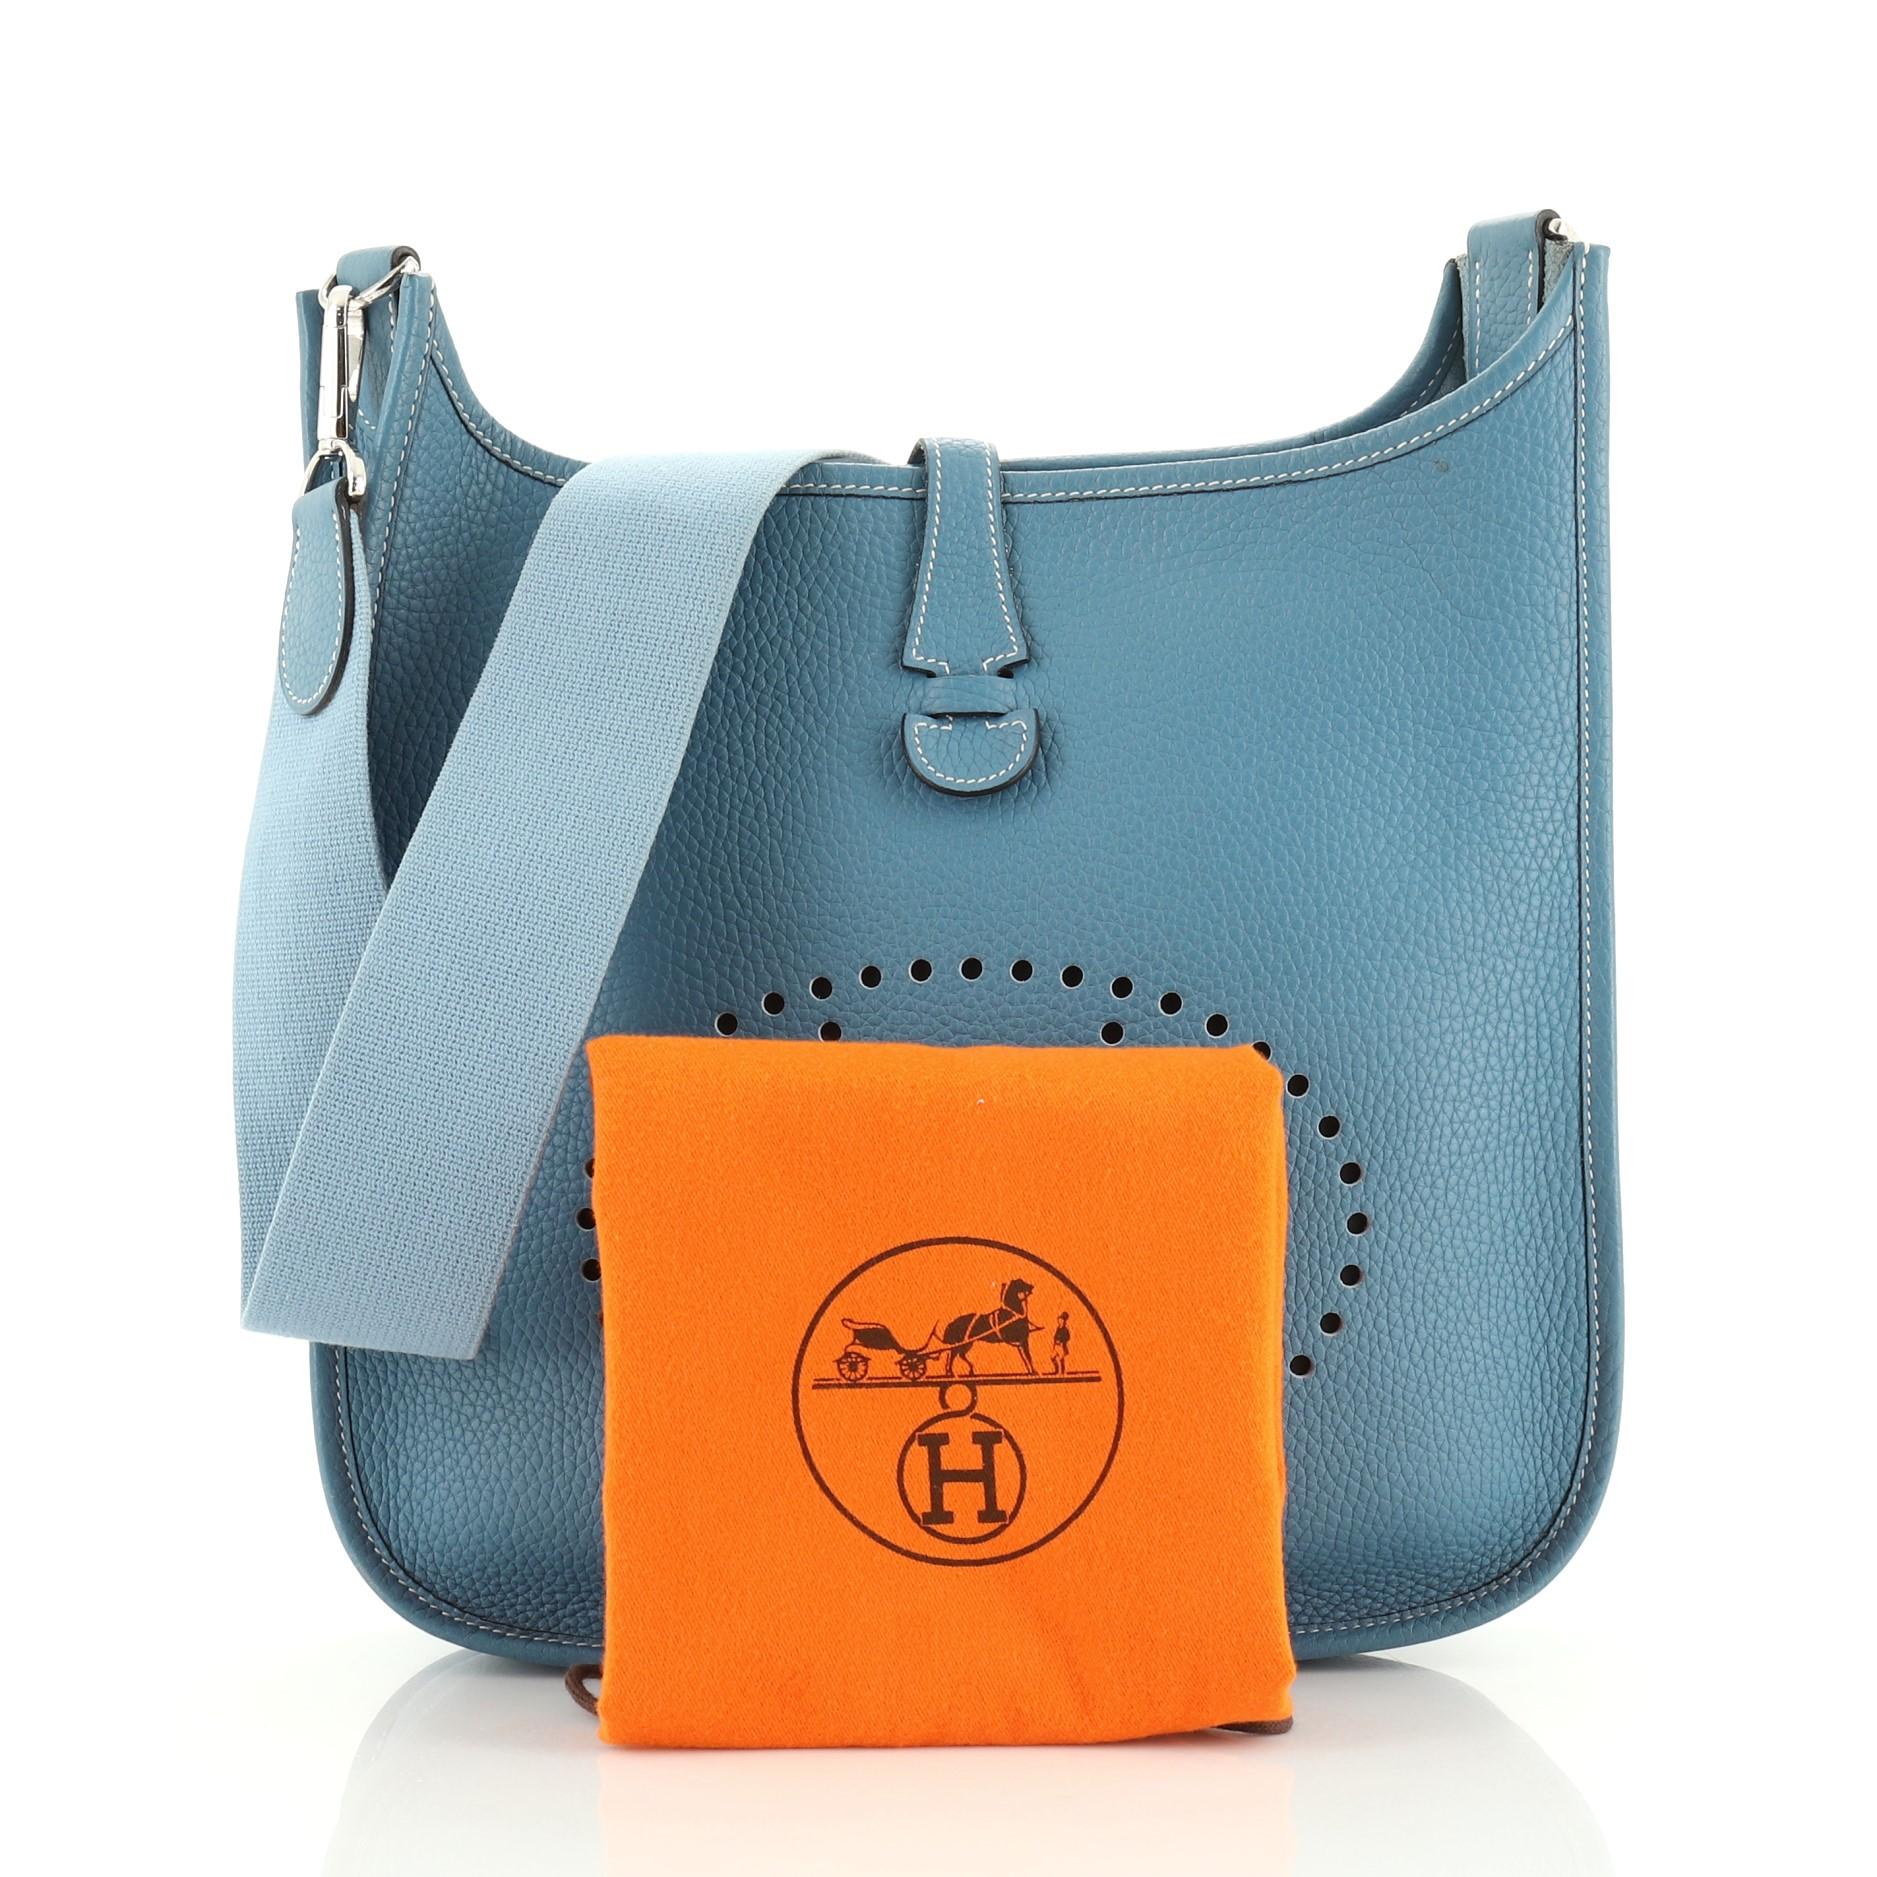 This Hermes Evelyne Crossbody Gen I Clemence PM, crafted in Bleu Jean blue Clemence leather, features a textile shoulder strap, perforated H design at the front, and palladium hardware. Its top leather tab closure opens to a blue raw leather